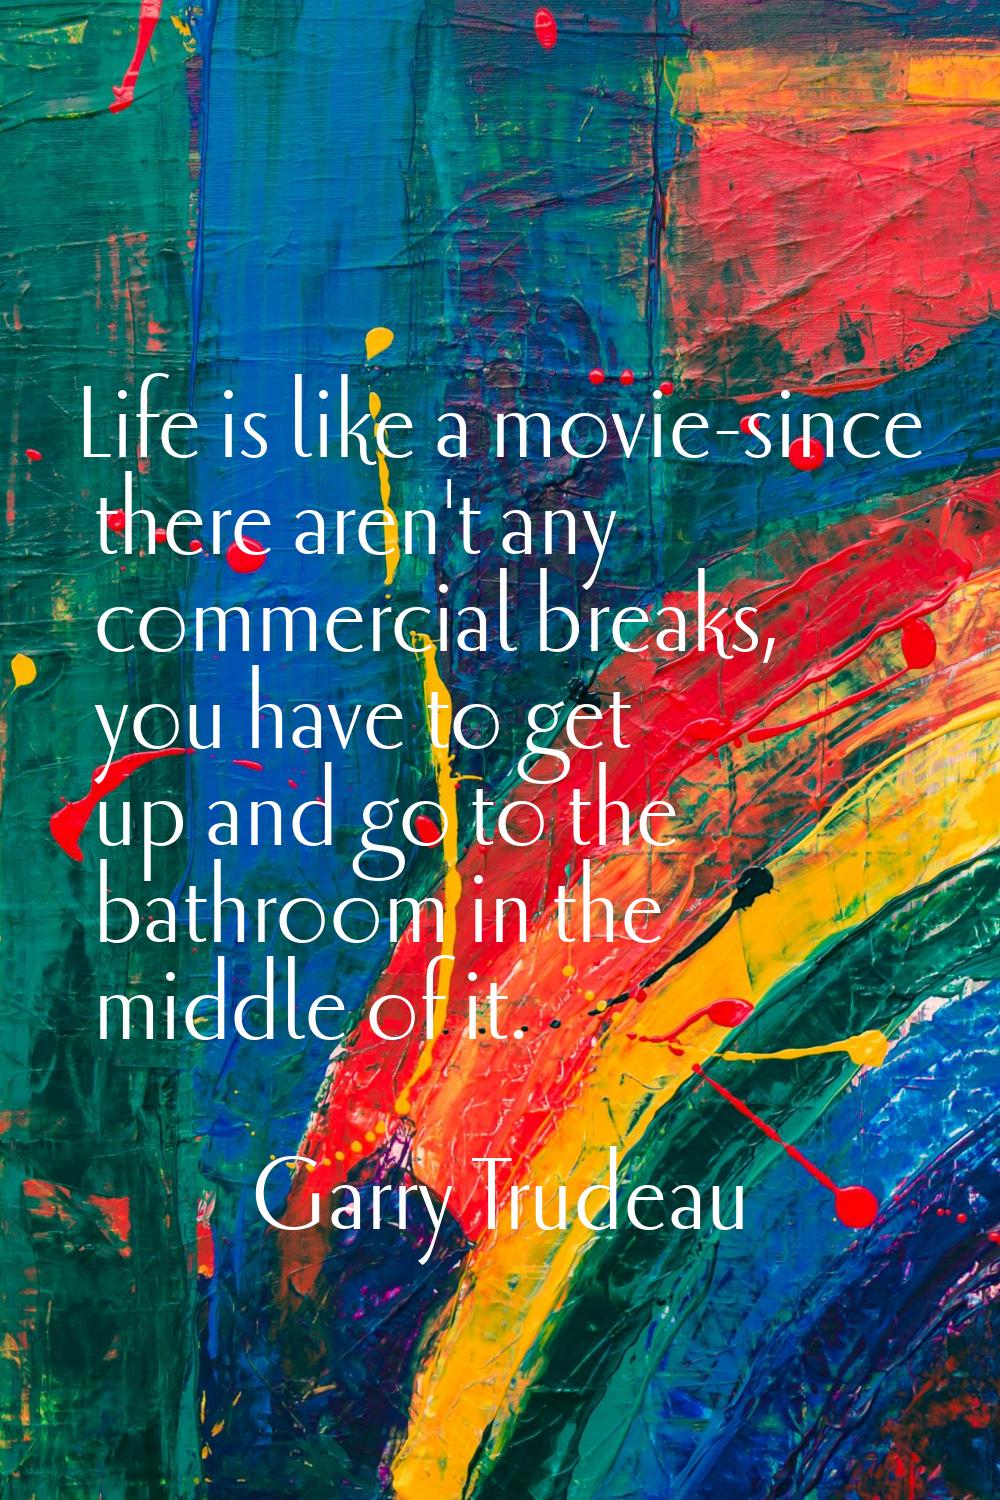 Life is like a movie-since there aren't any commercial breaks, you have to get up and go to the bat